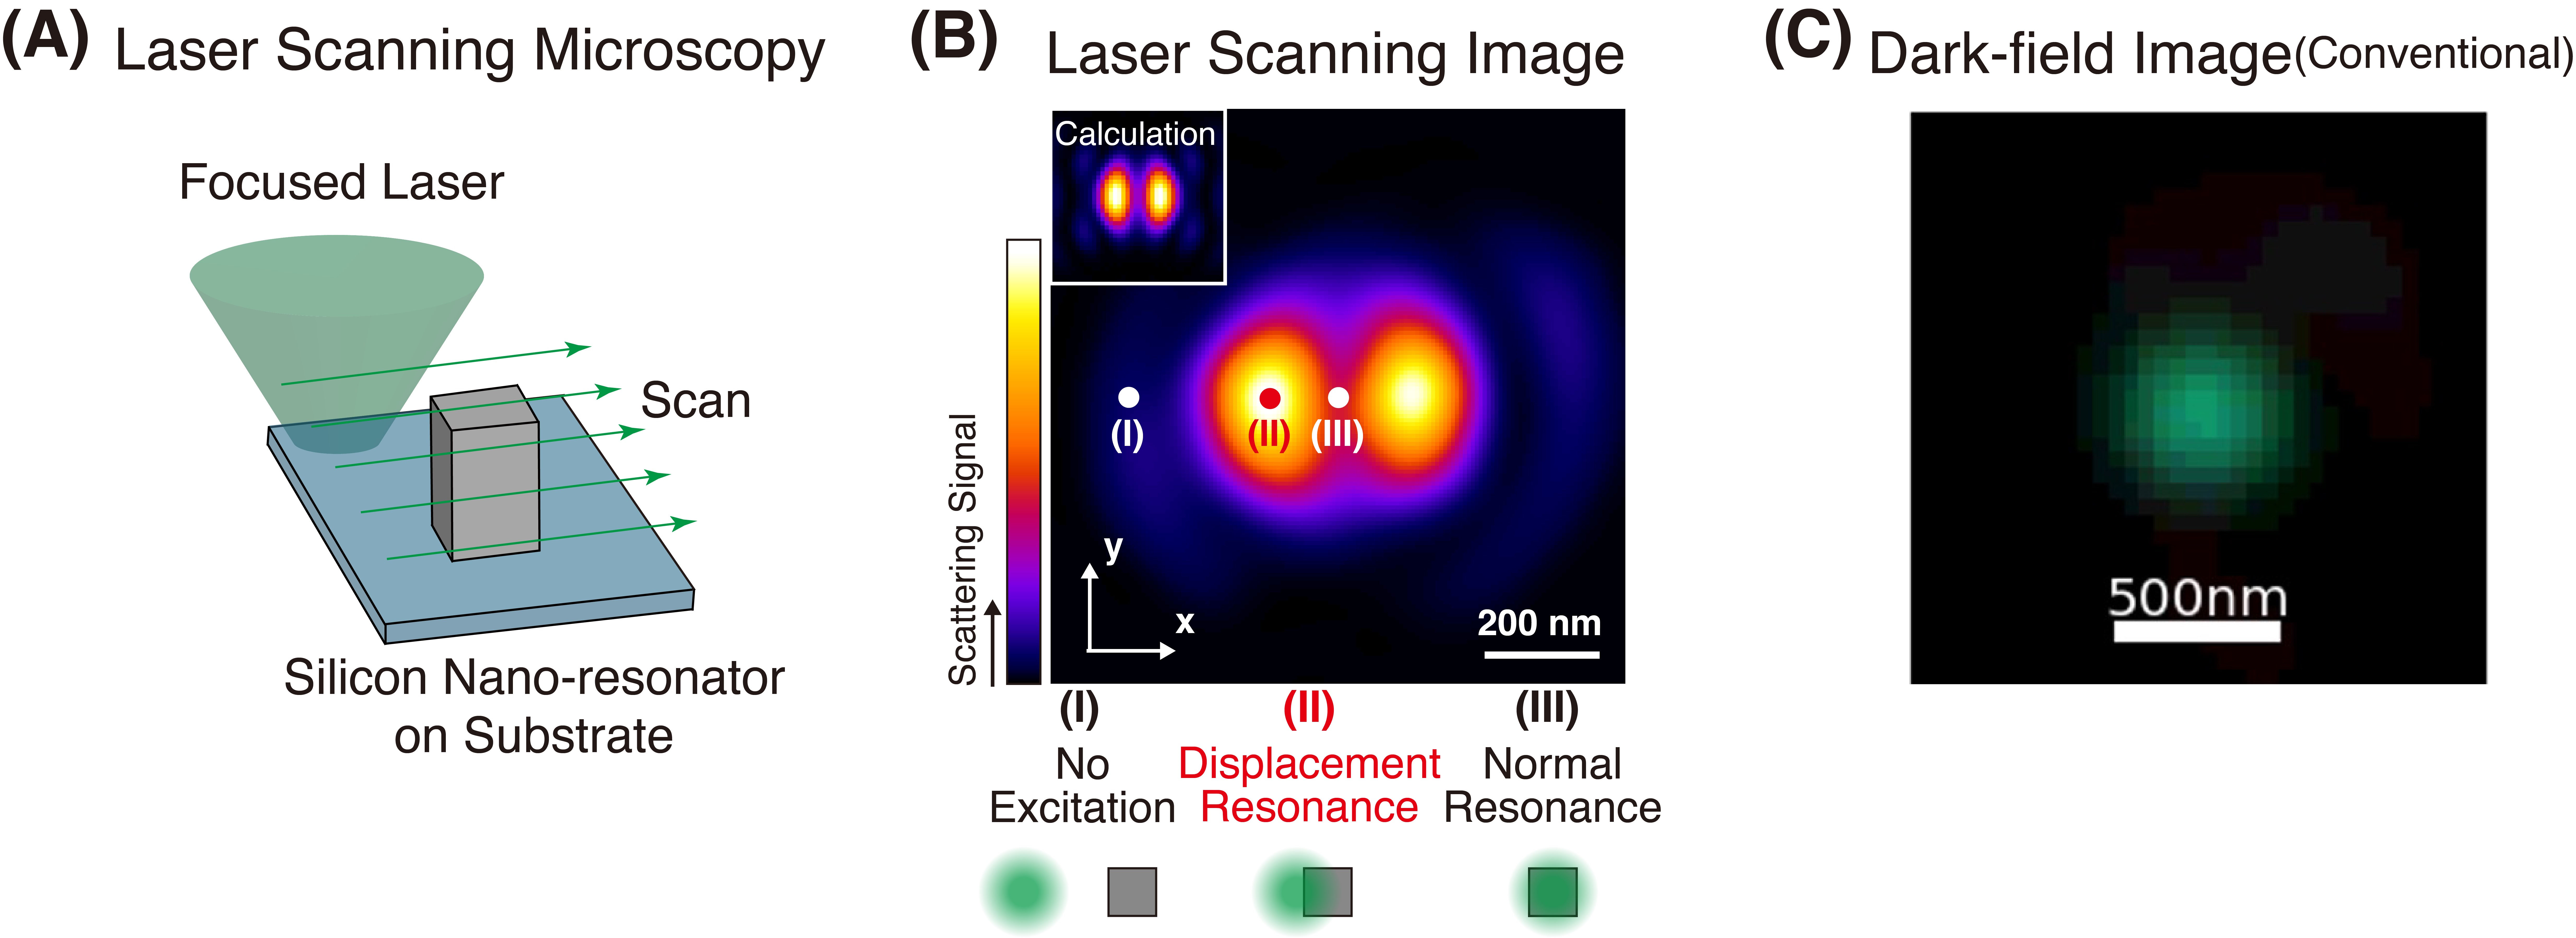 Silicon Mie resonator by laser scanning microscope